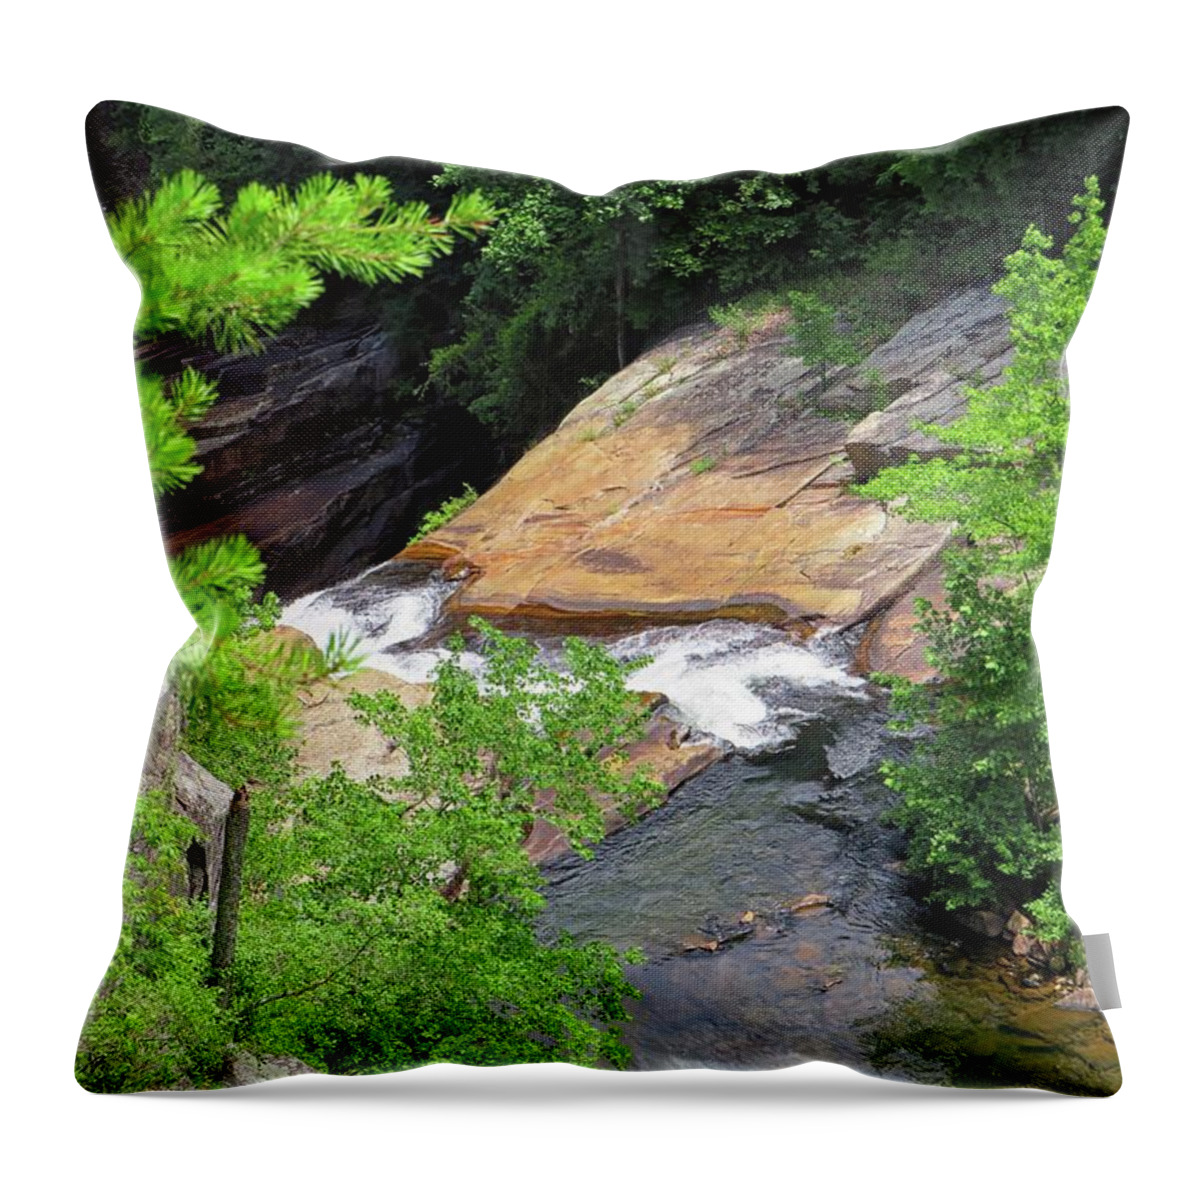 Tallulah Gorge Throw Pillow featuring the photograph Tallulah River by Connor Beekman